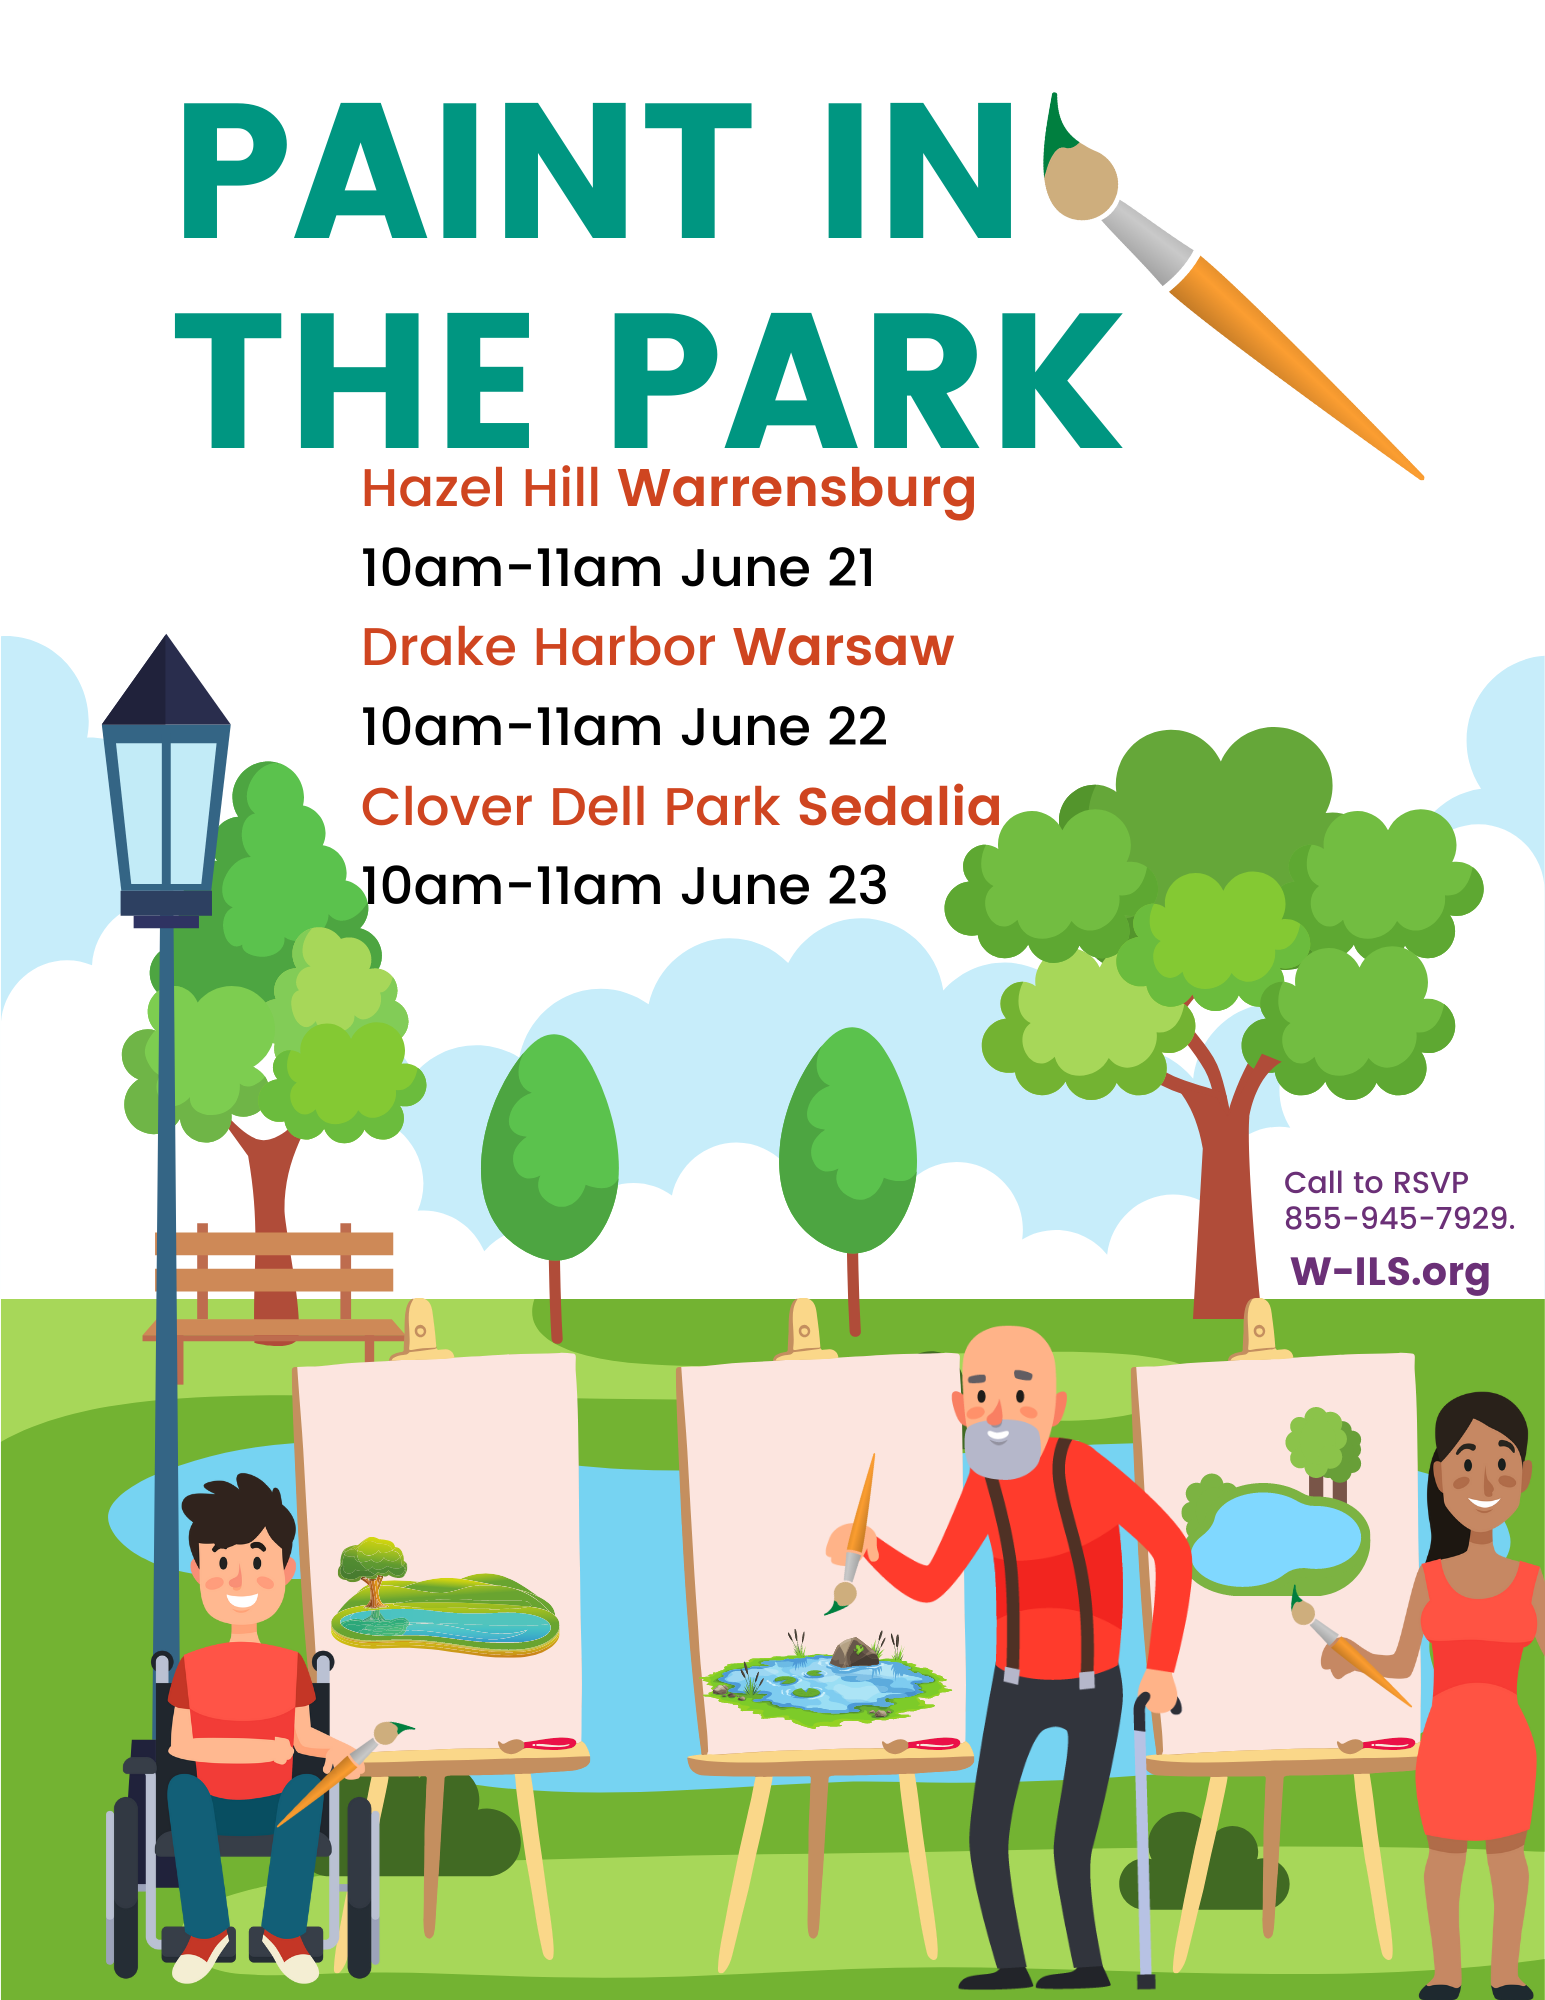 Paint in the Park with WILS. Hazel Hill Lake, Warrensburg, MO 64093 Call 55-945-7929 to RSVP